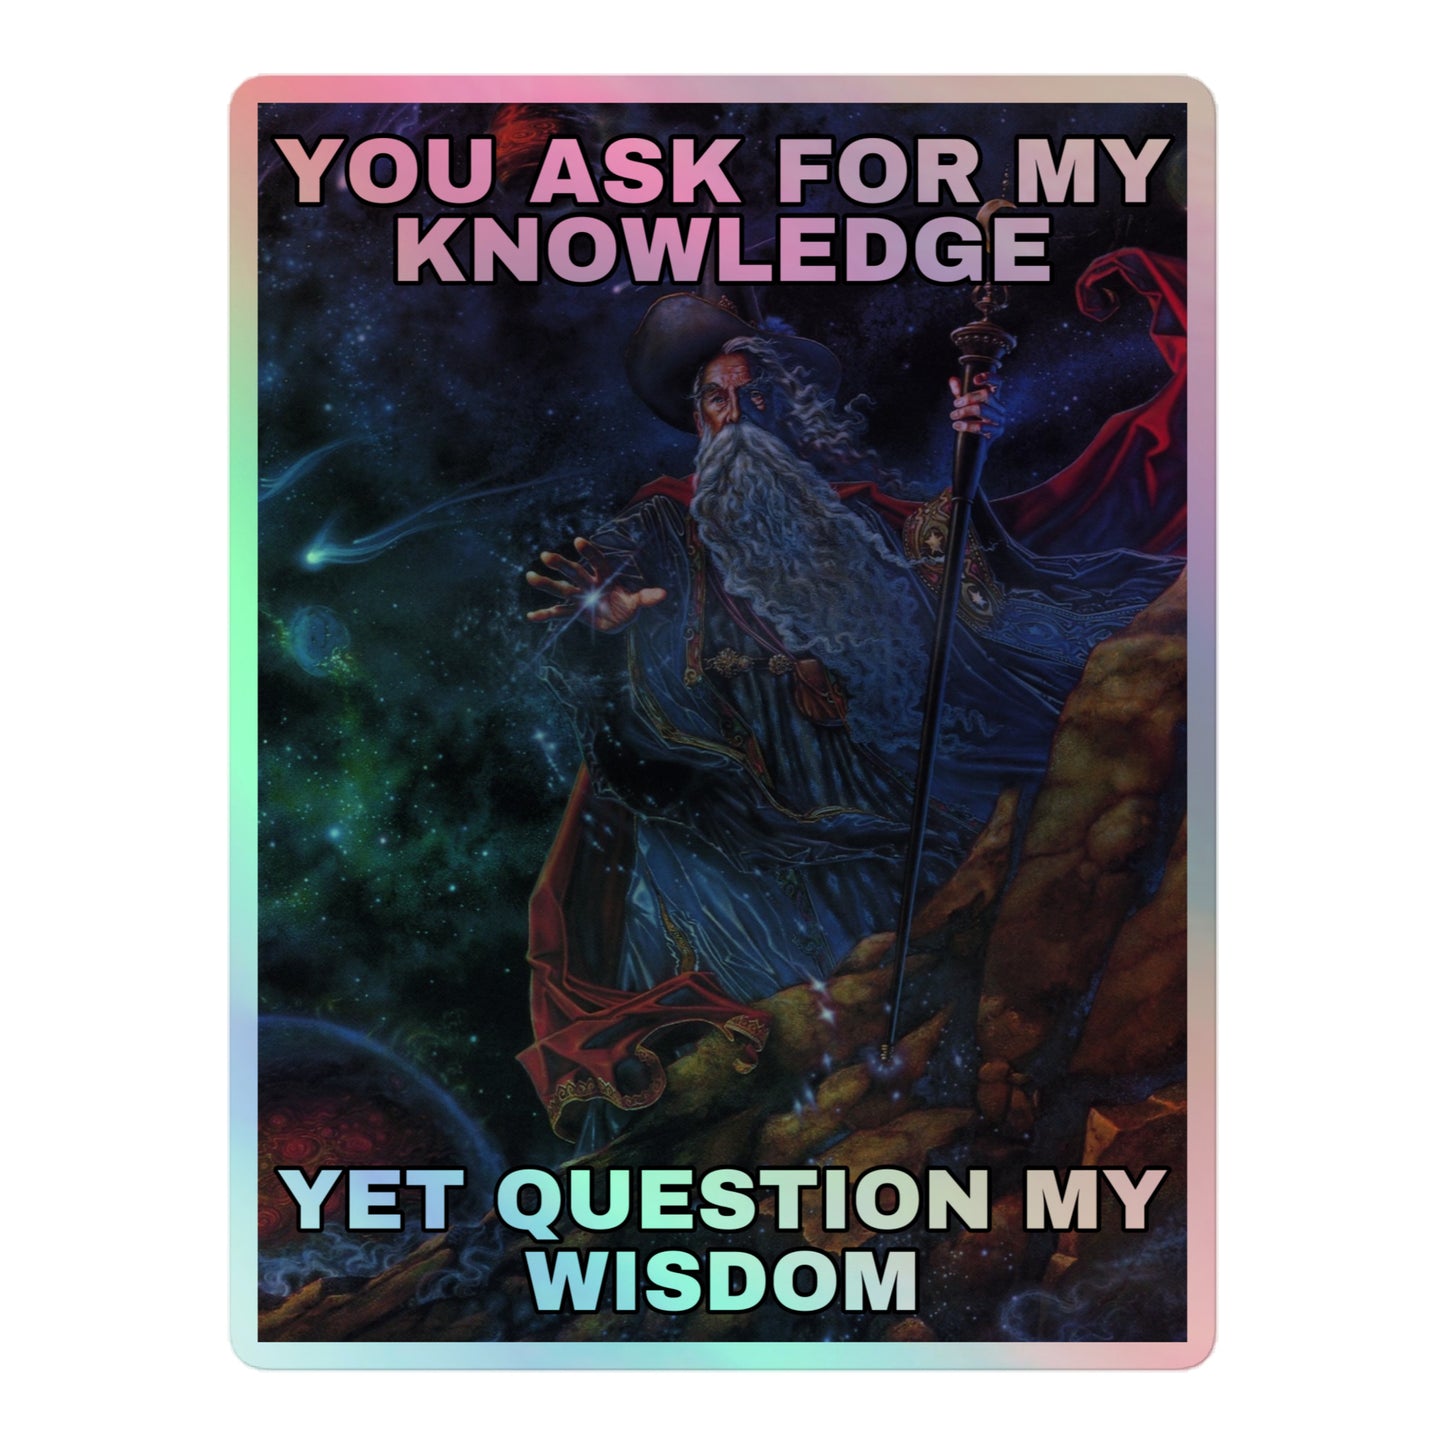 You ask for my knowledge (sticker)